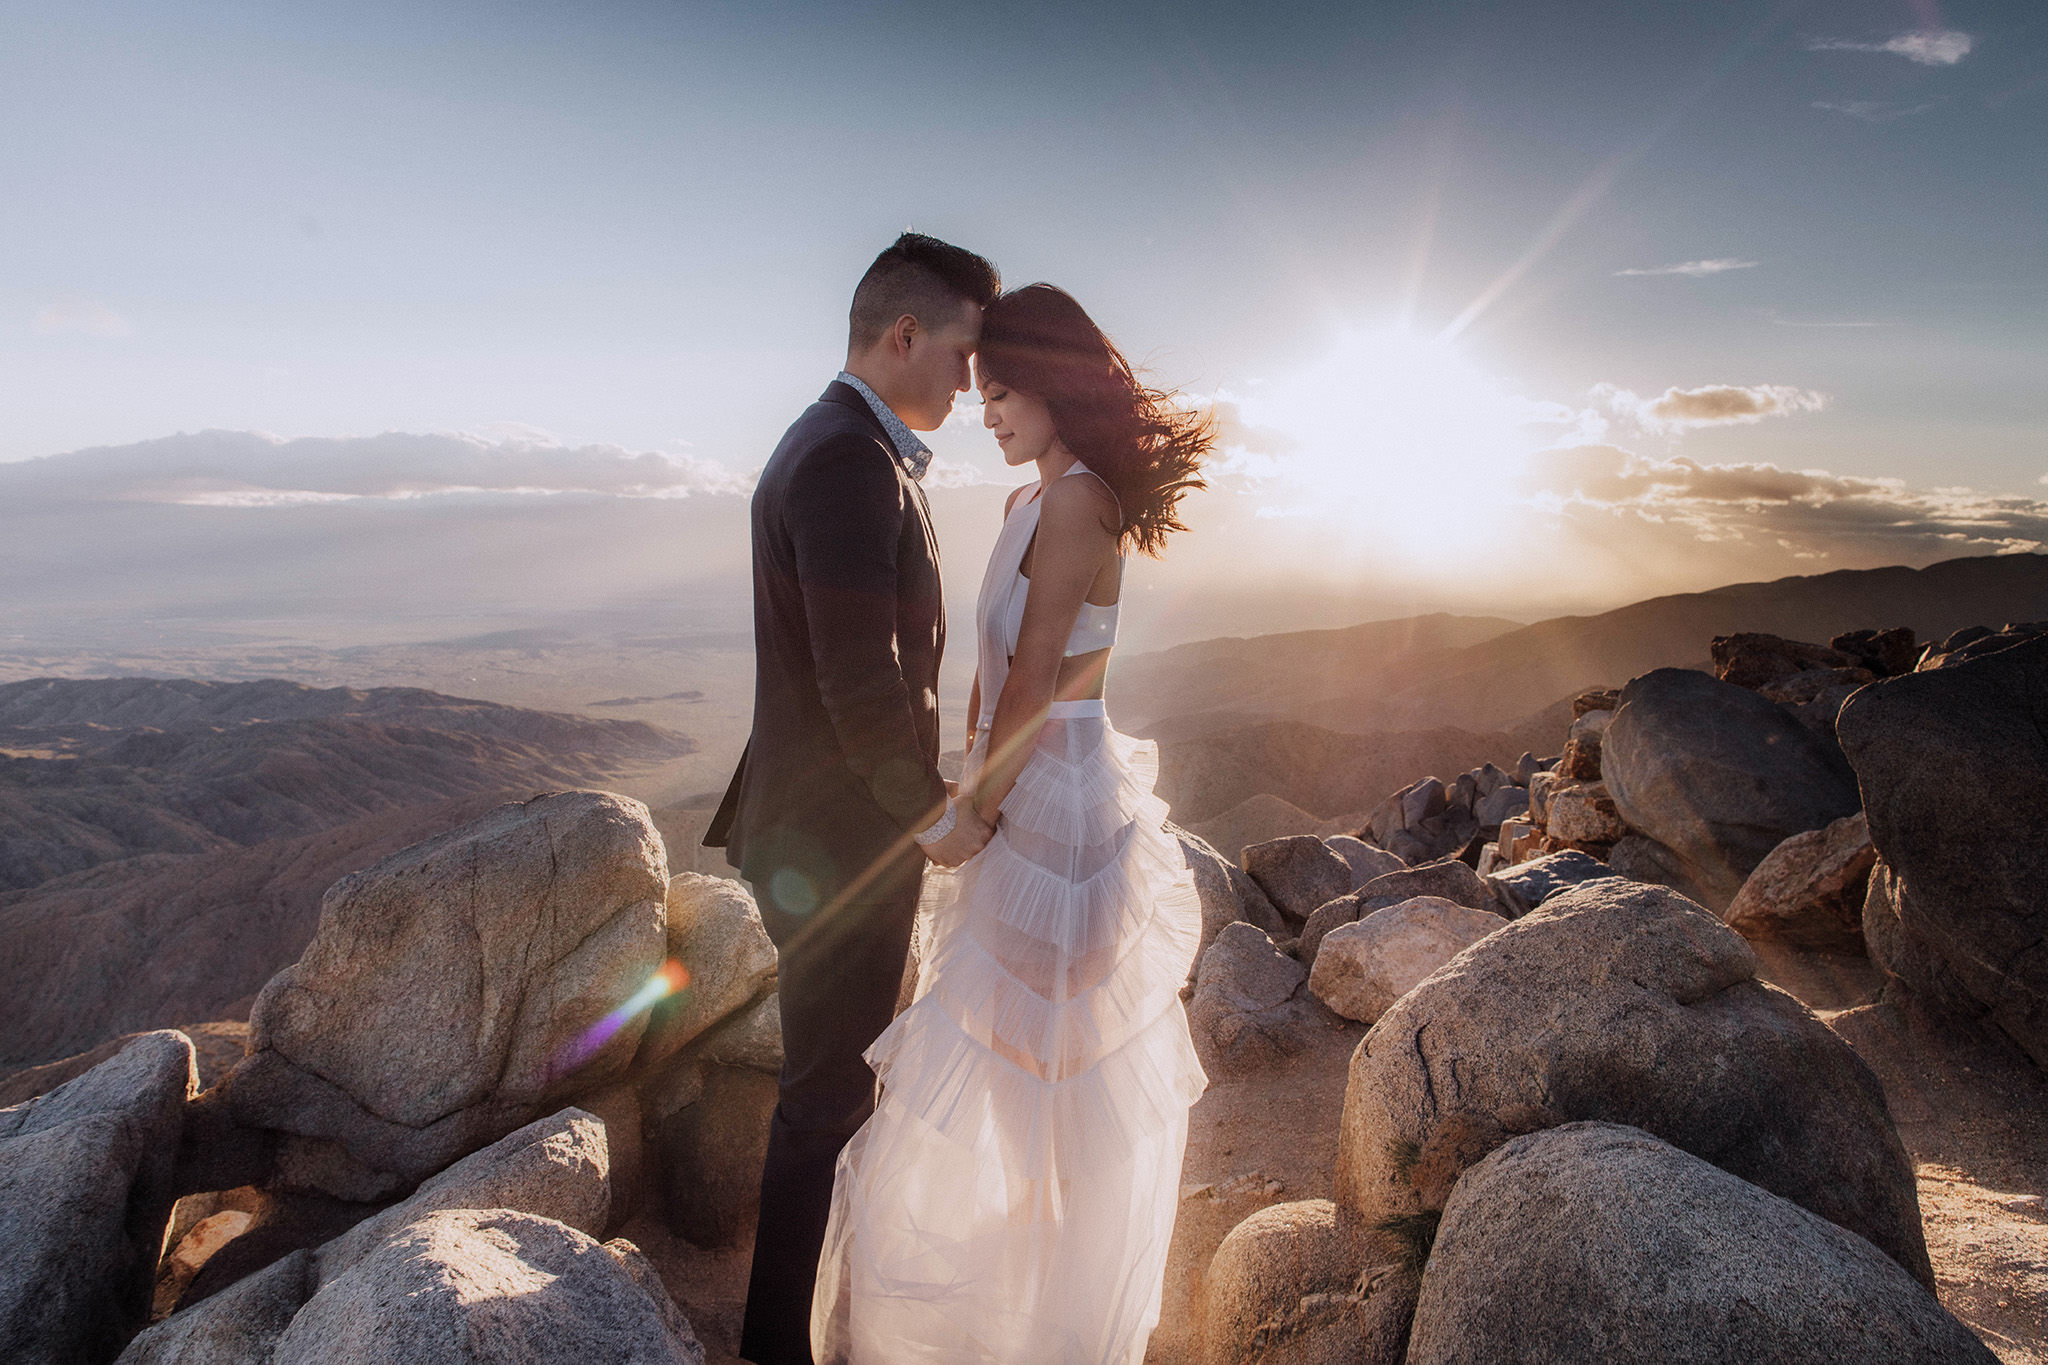 The engaged couple is standing, heads touching and holding hands in the middle of big rocks, with mountains and sunset in the background. Image by Jenny Fu Studio